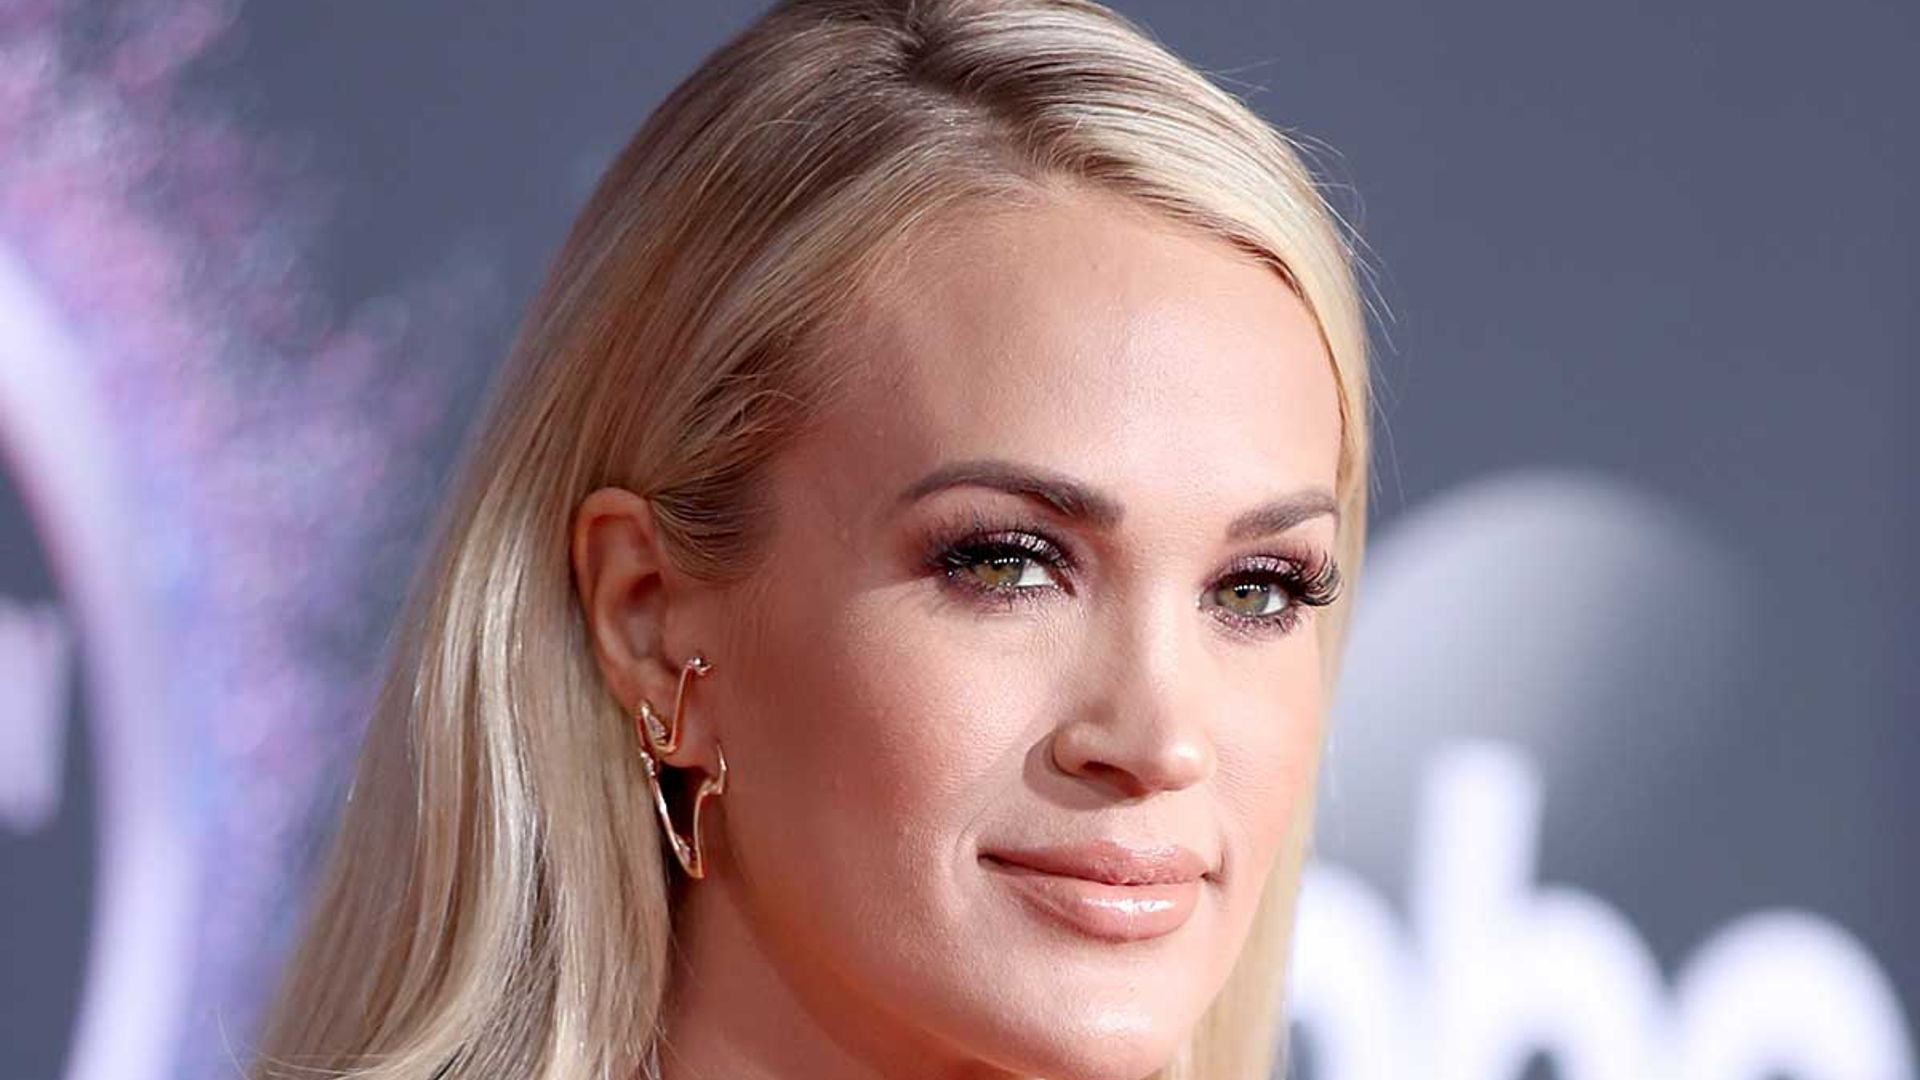 Carrie Underwood's killer look in new tour photos will leave you speechless